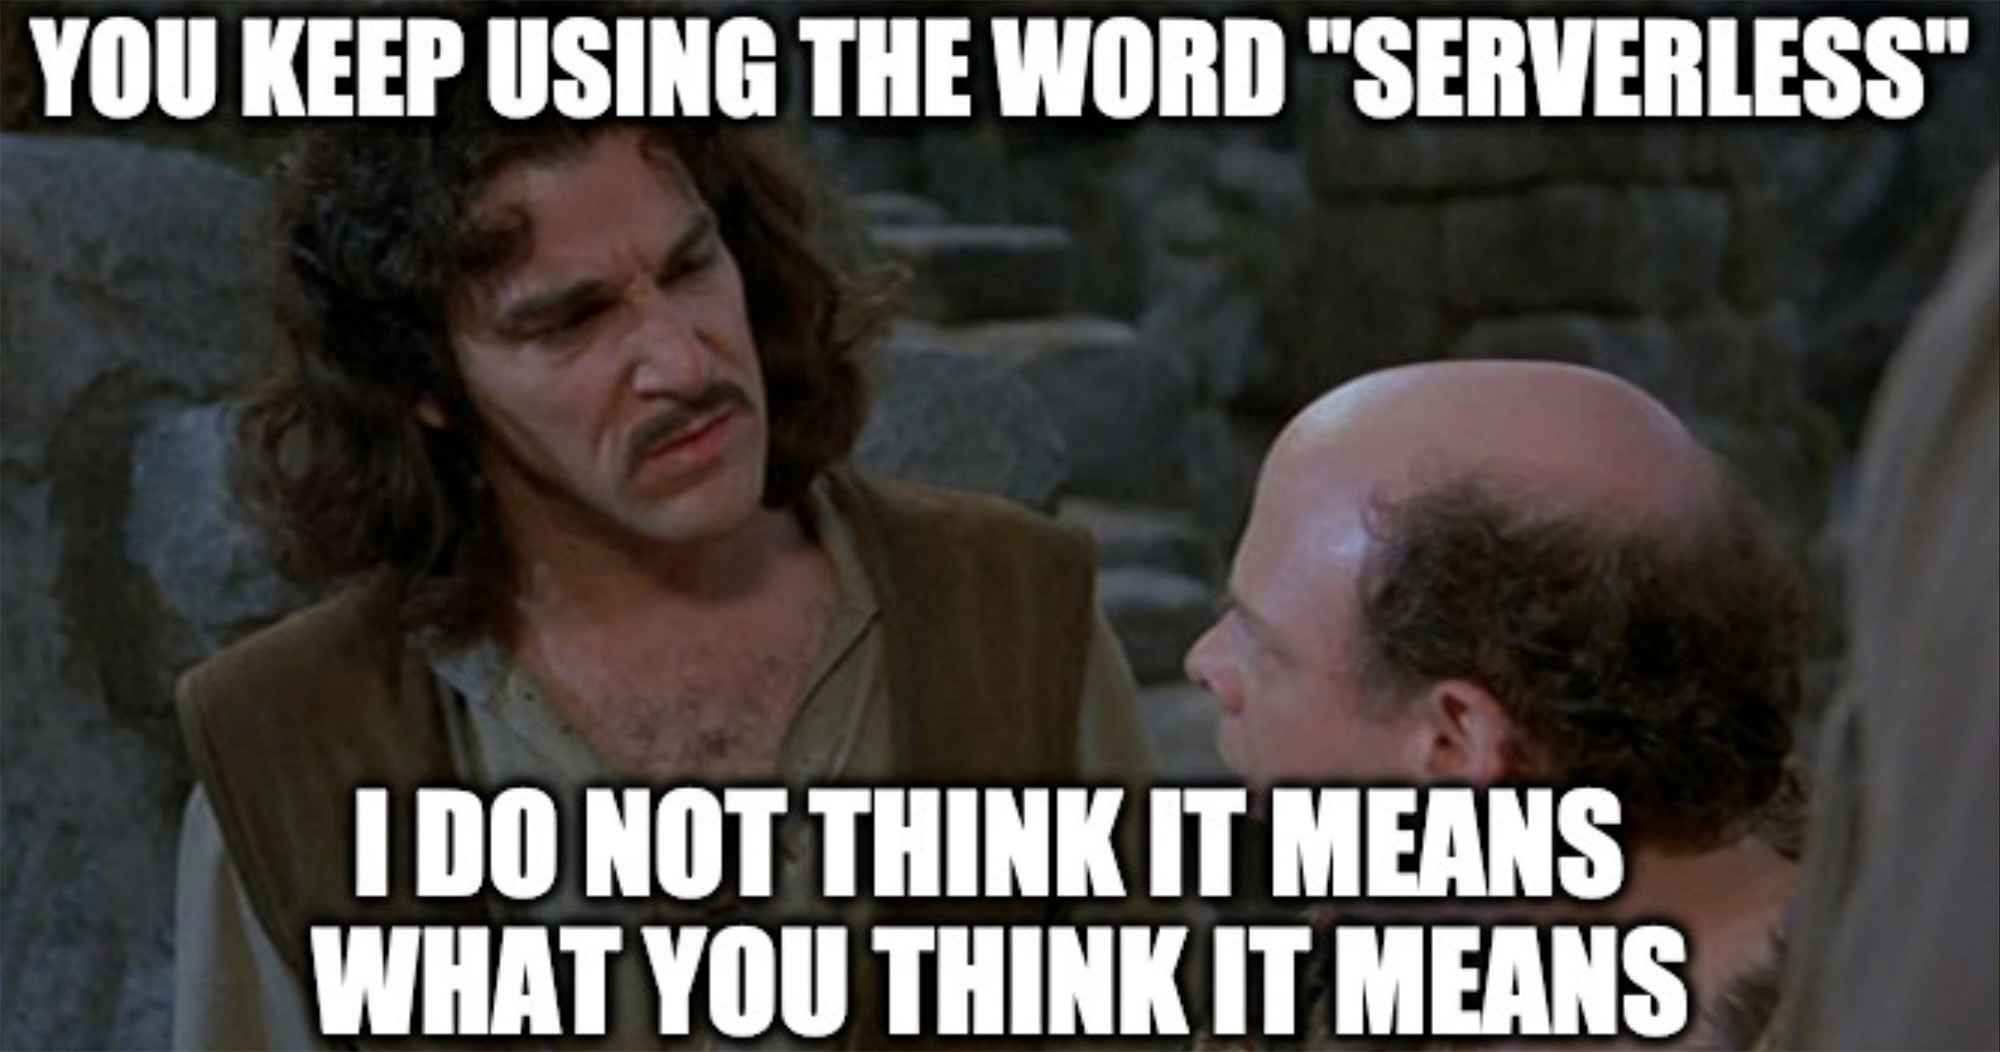 Princess Bride "serverless does not mean what you think it means" meme.